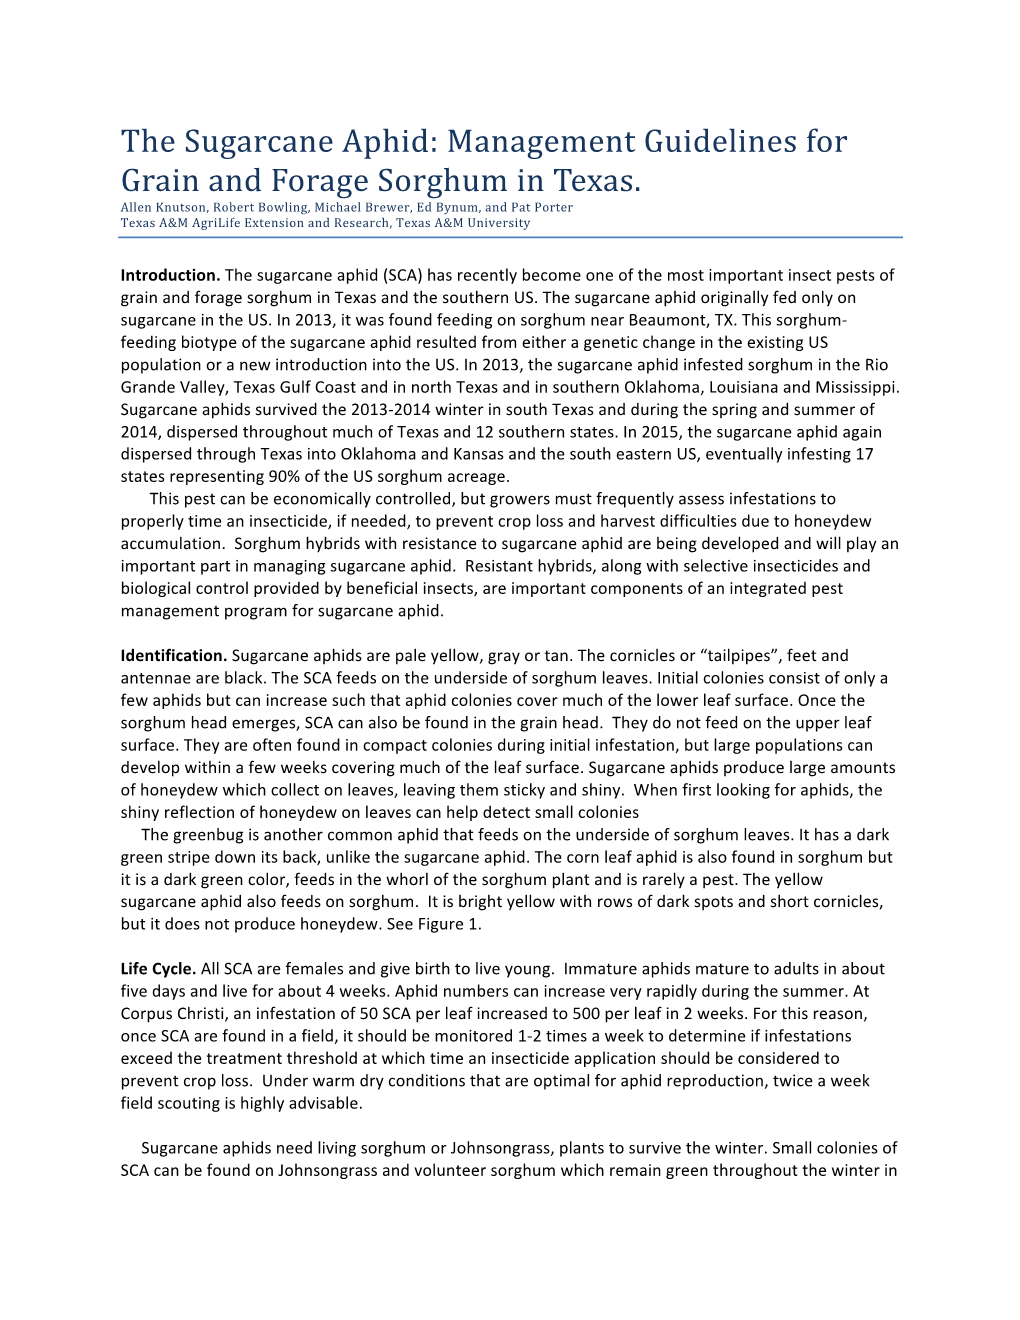 The Sugarcane Aphid: Management Guidelines for Grain and Forage Sorghum in Texas